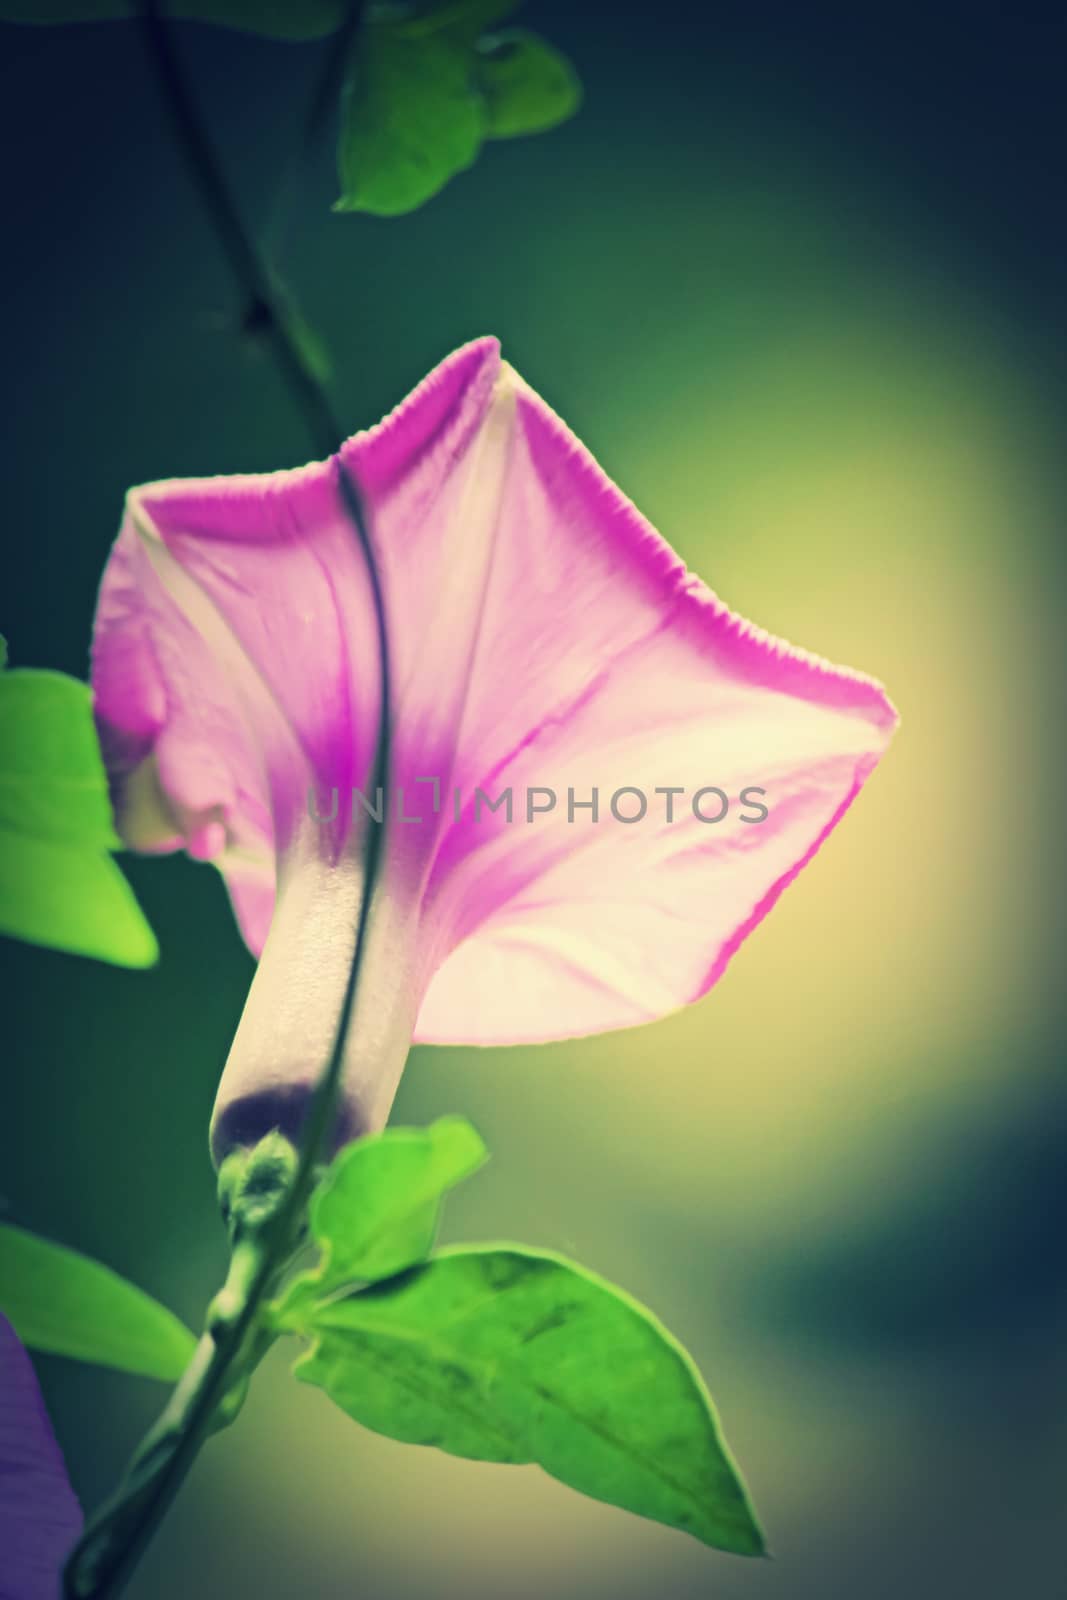 Flower of Ipomoea cairica (I. palmata) by yands